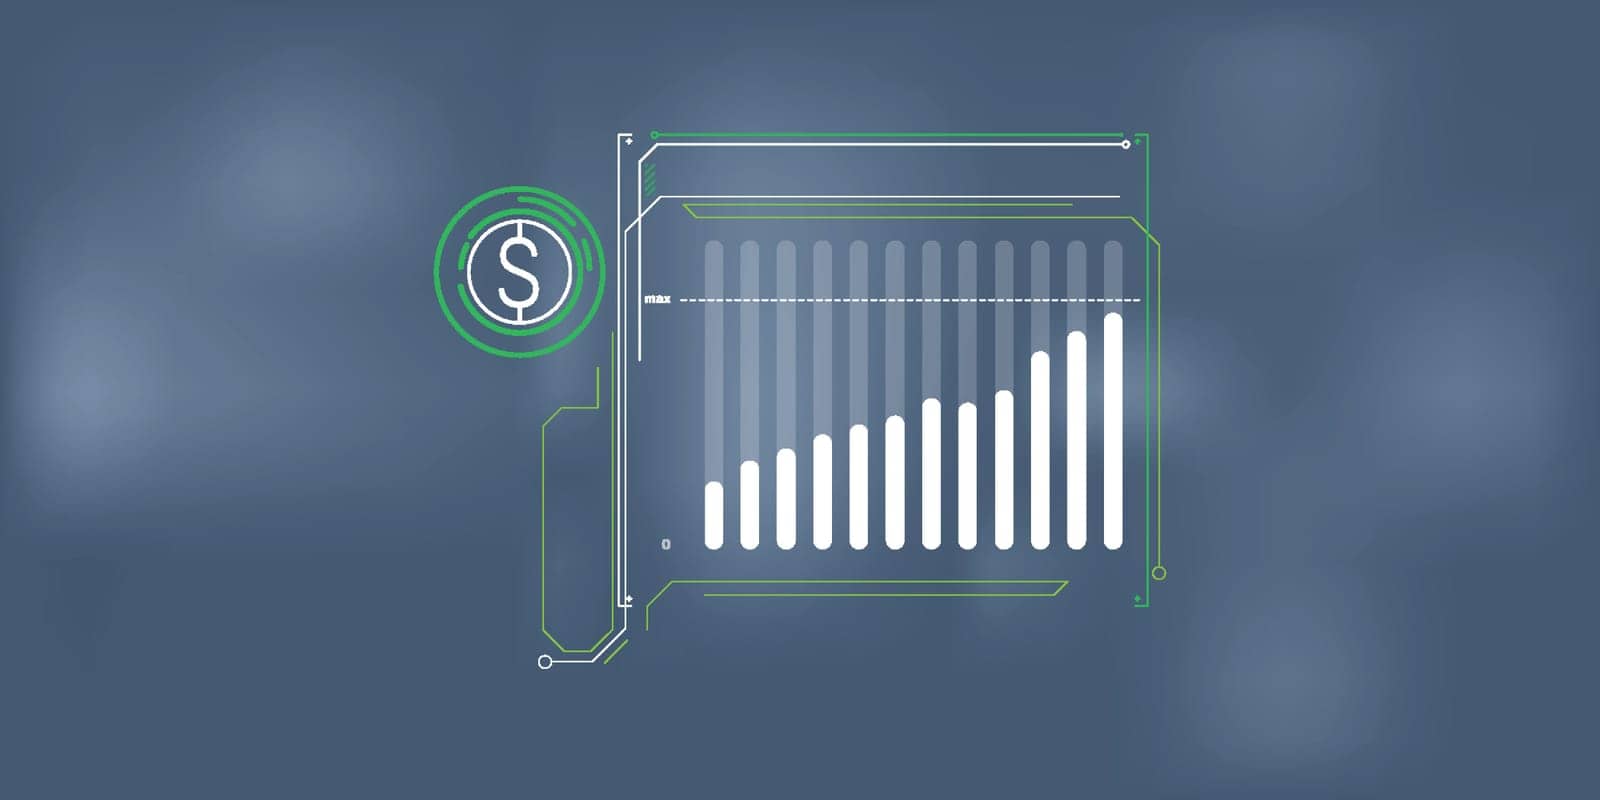 Abstract infographic showing the growth of the dollar exchange rate. Vector illustration.